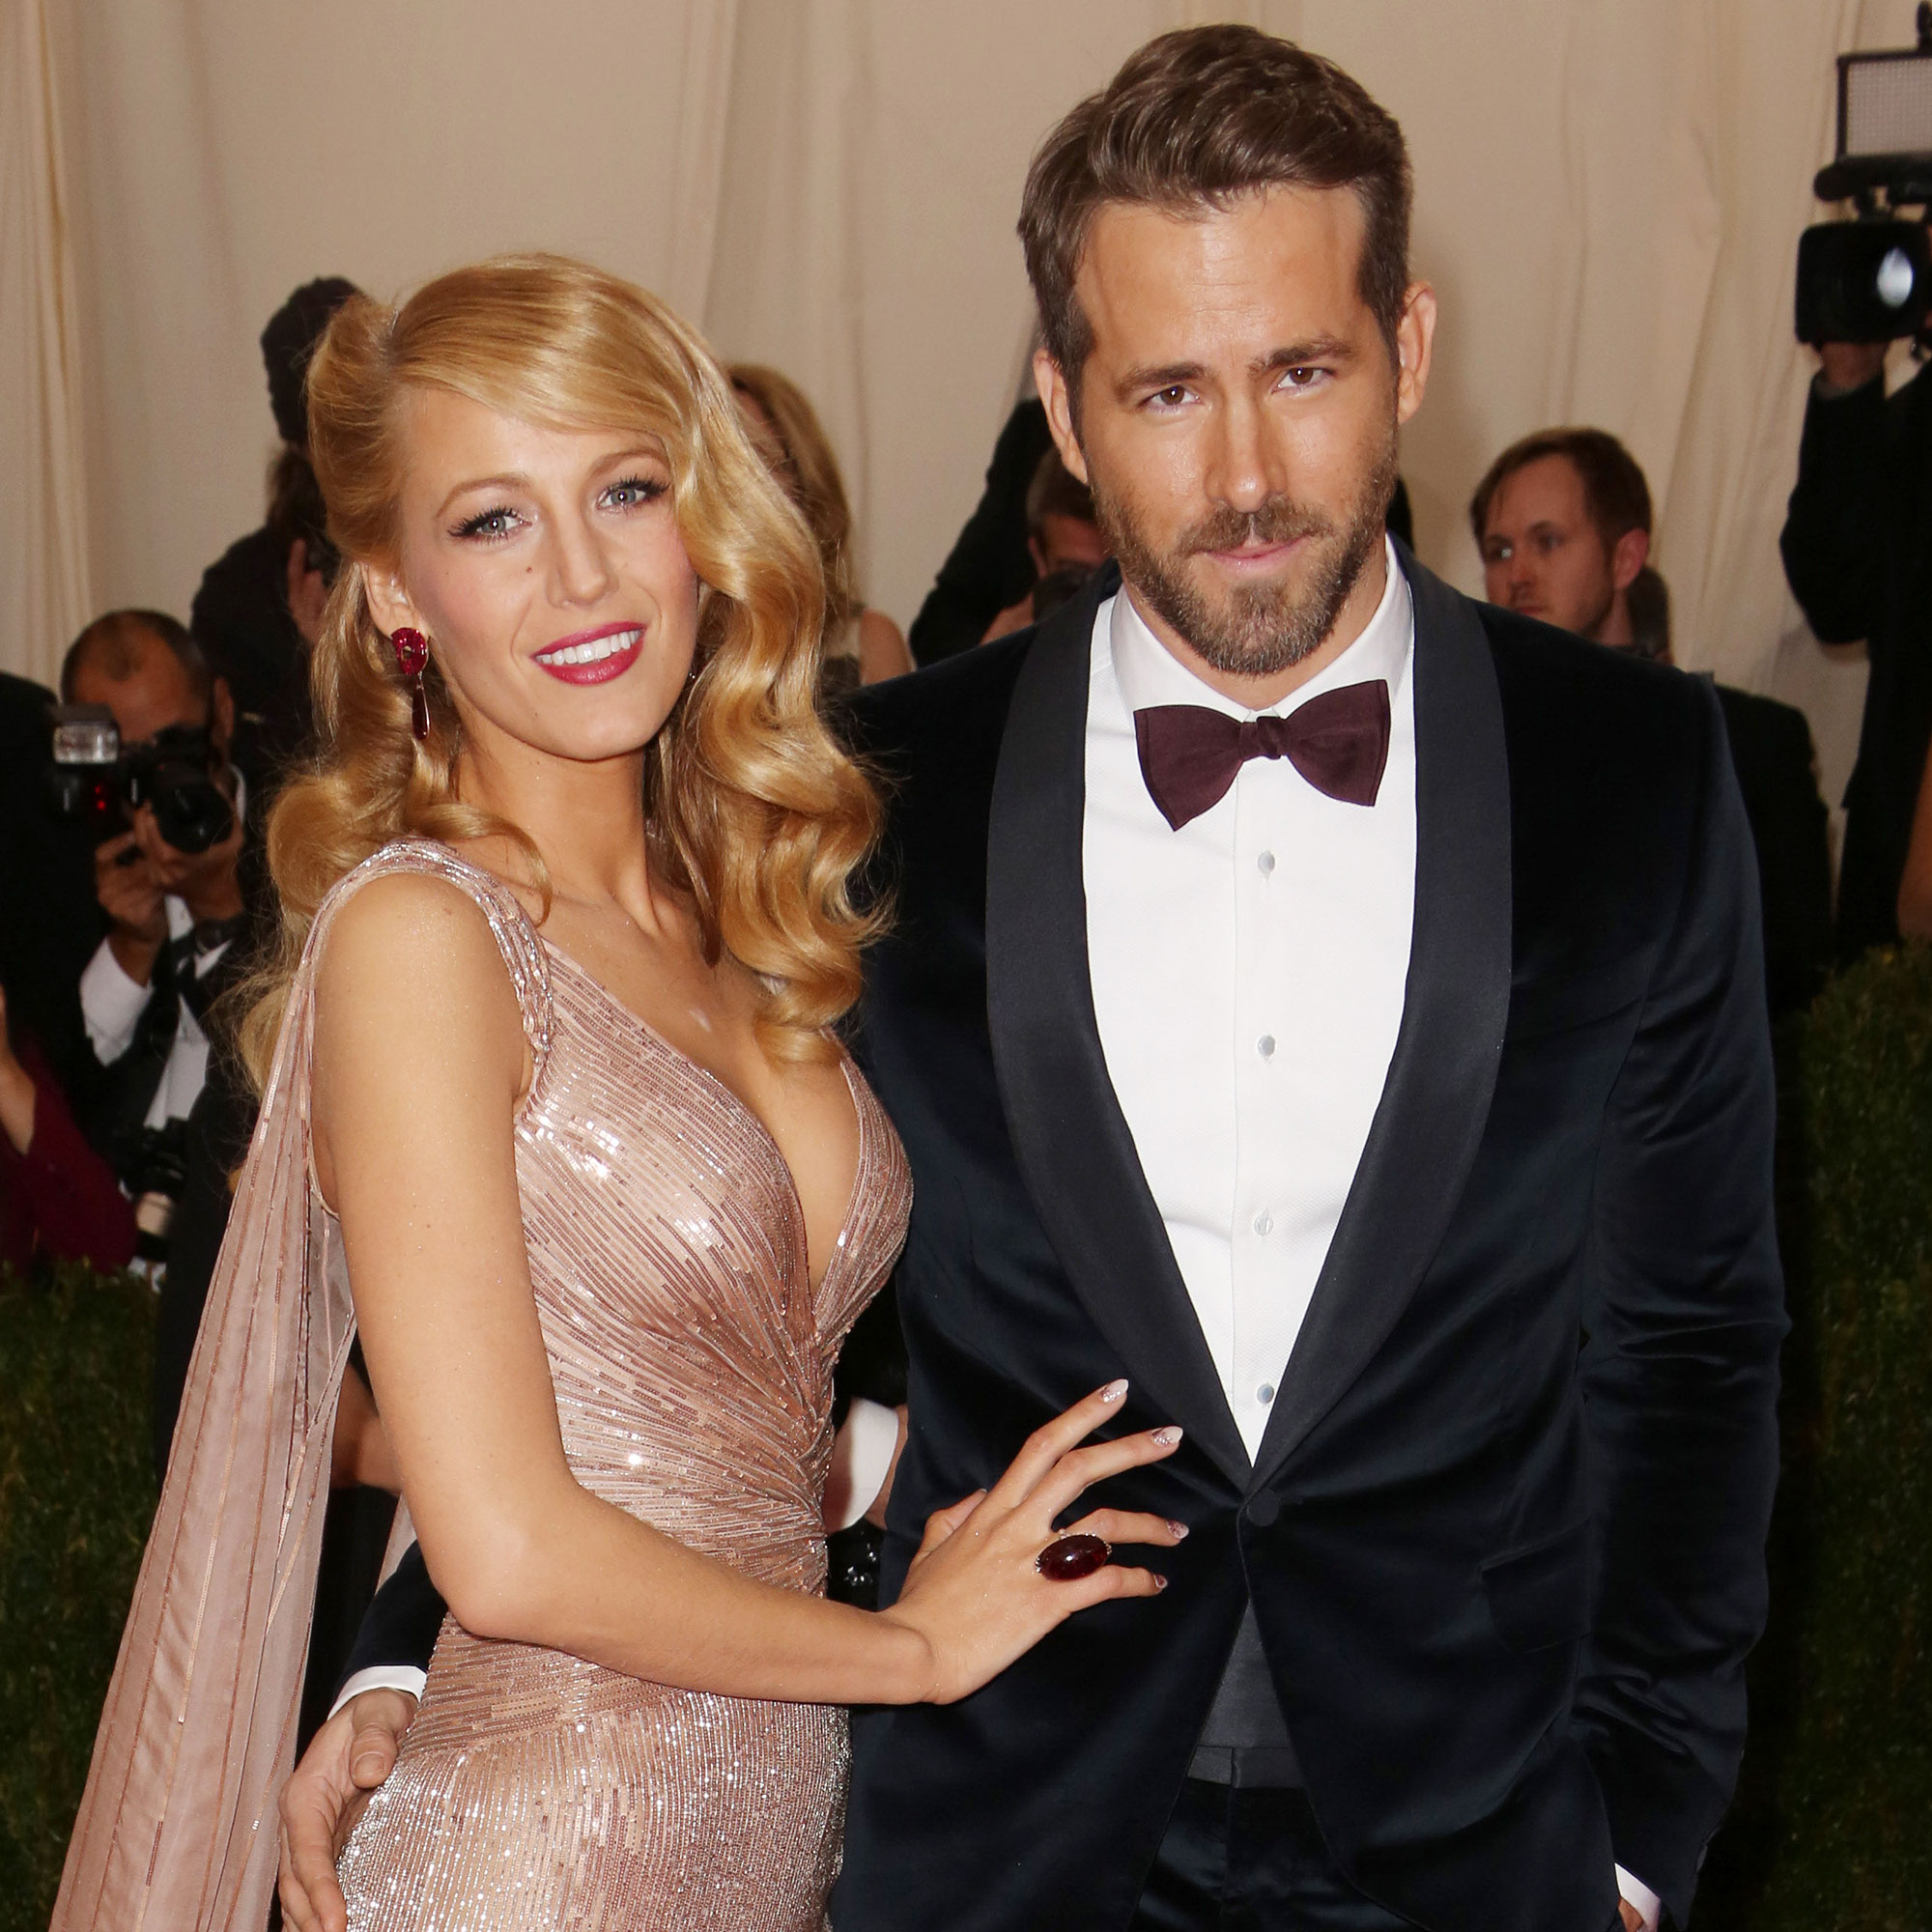 Met Gala 2022: The Theme, Date, Hosts, Attendees & Everything You Need To  Know